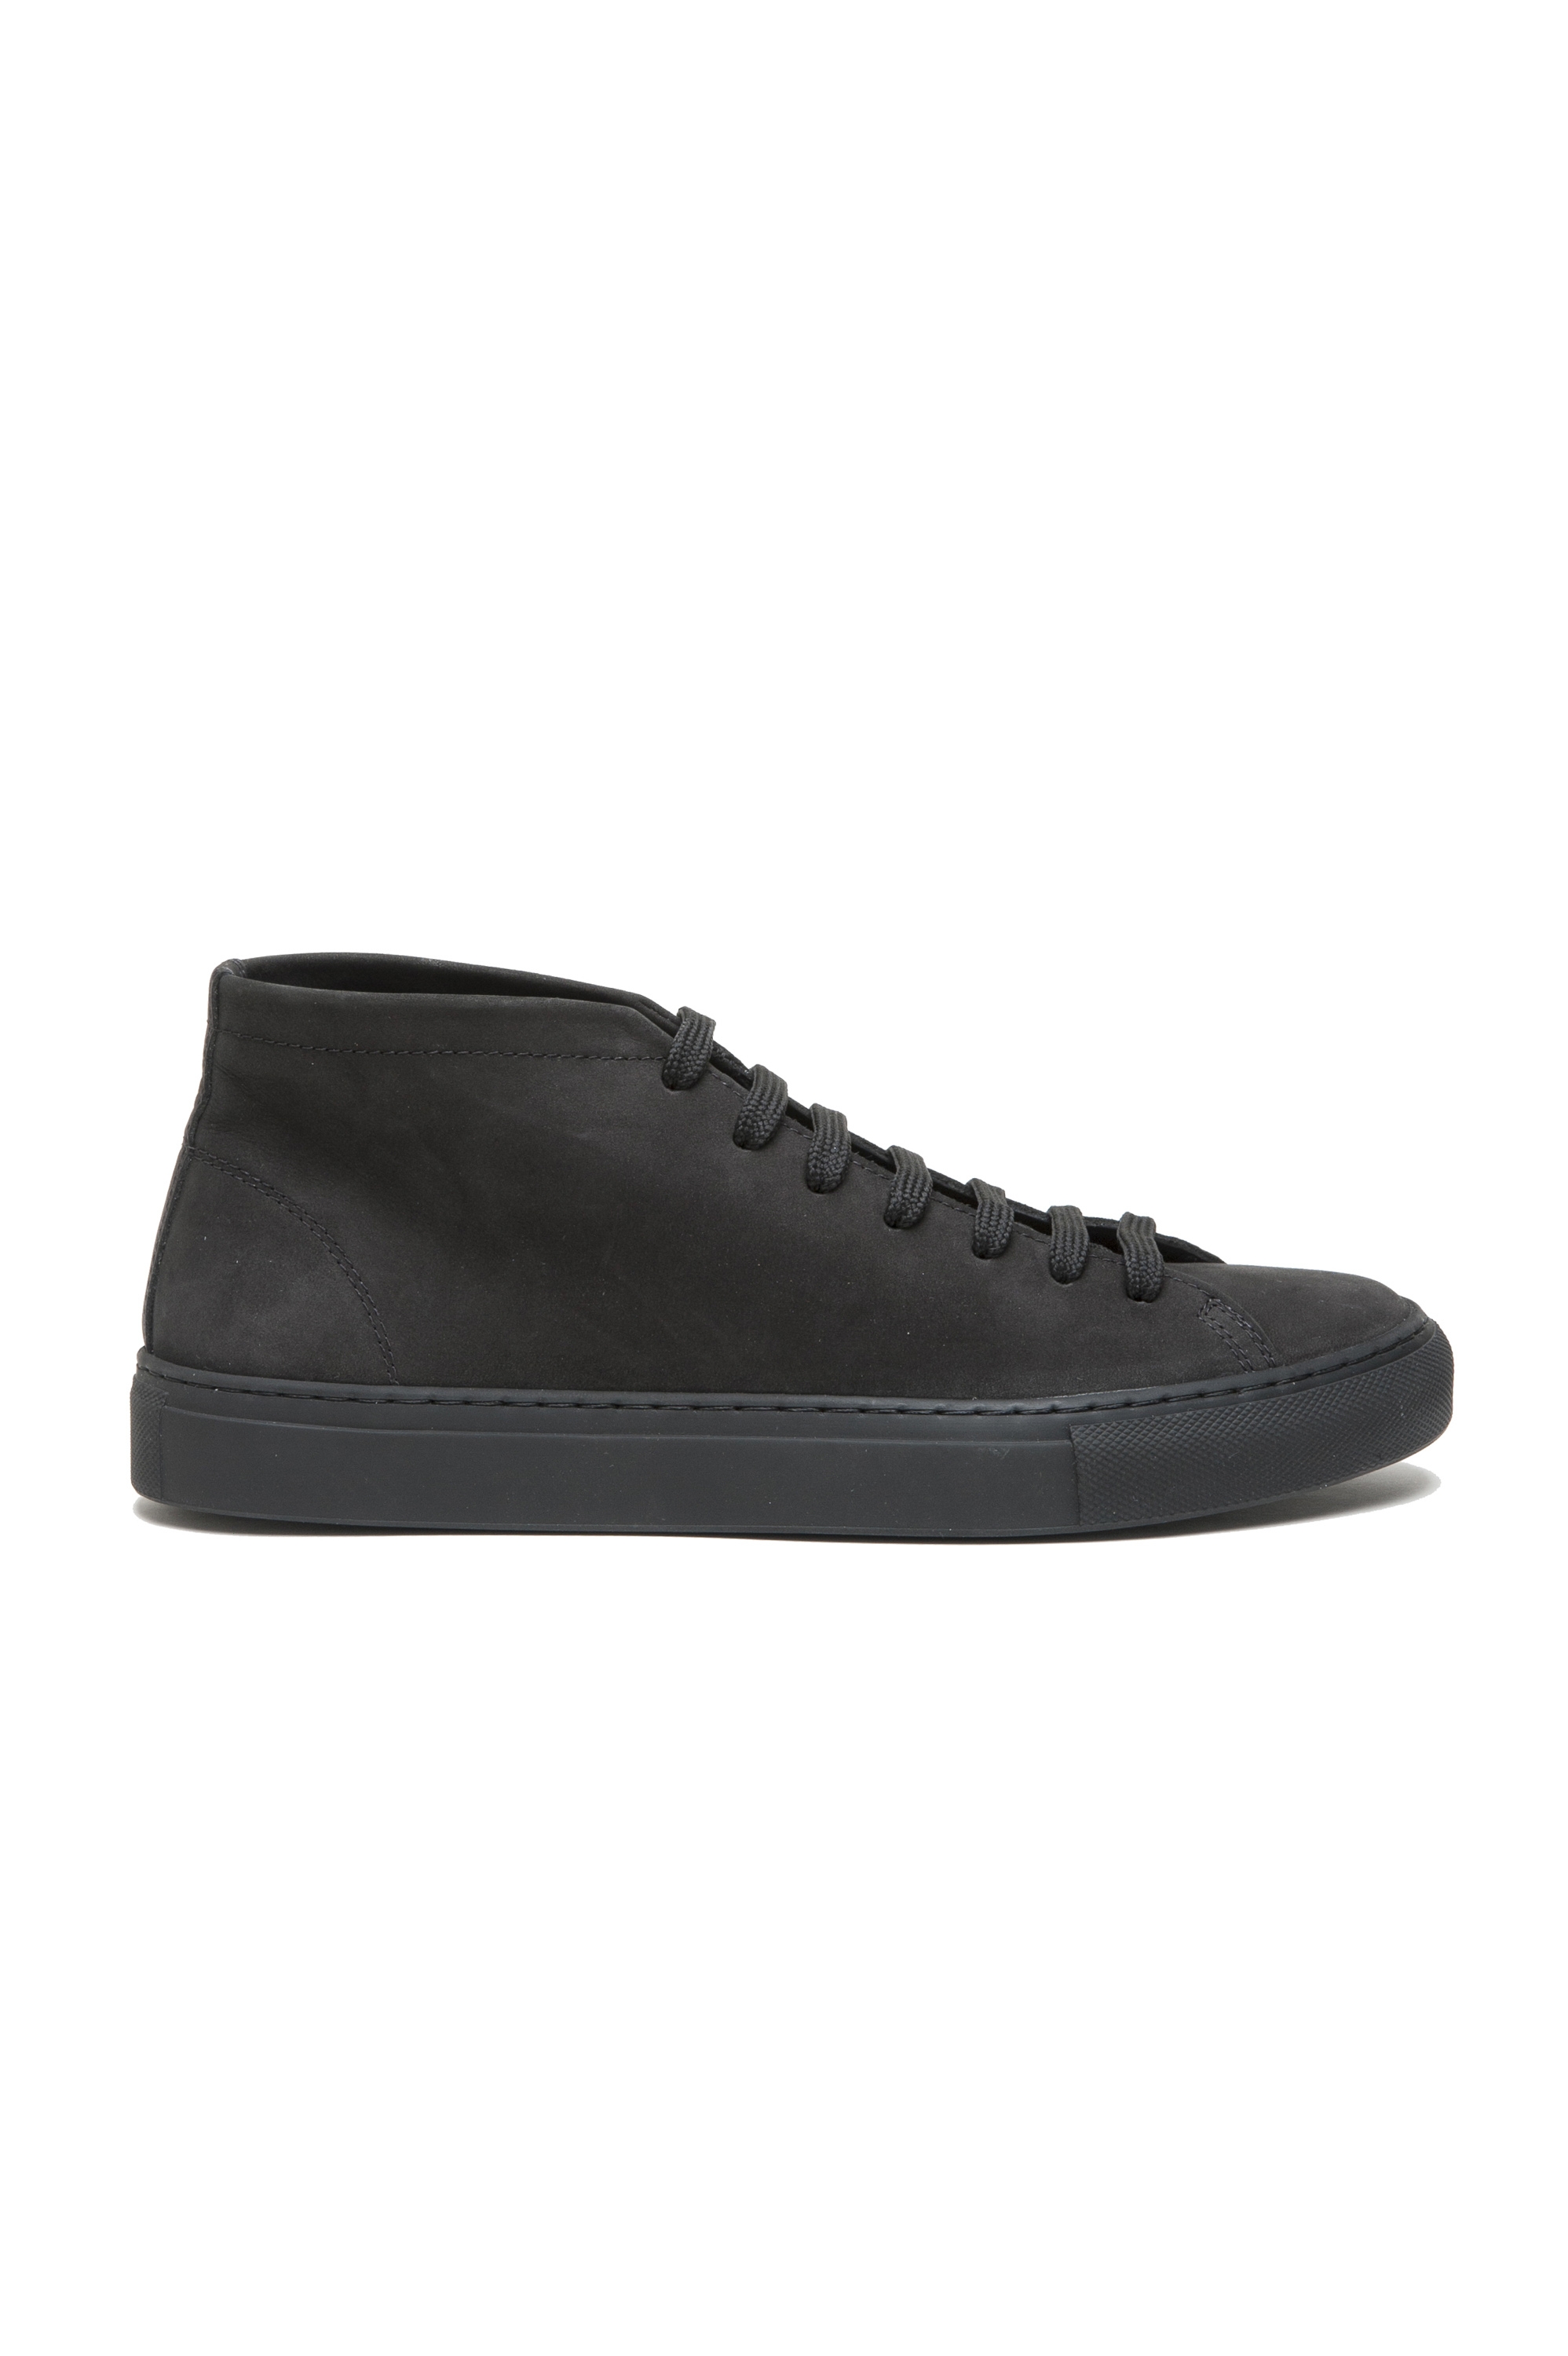 SBU 03959_2022SS Mid top lace up sneakers in black nubuck leather 01